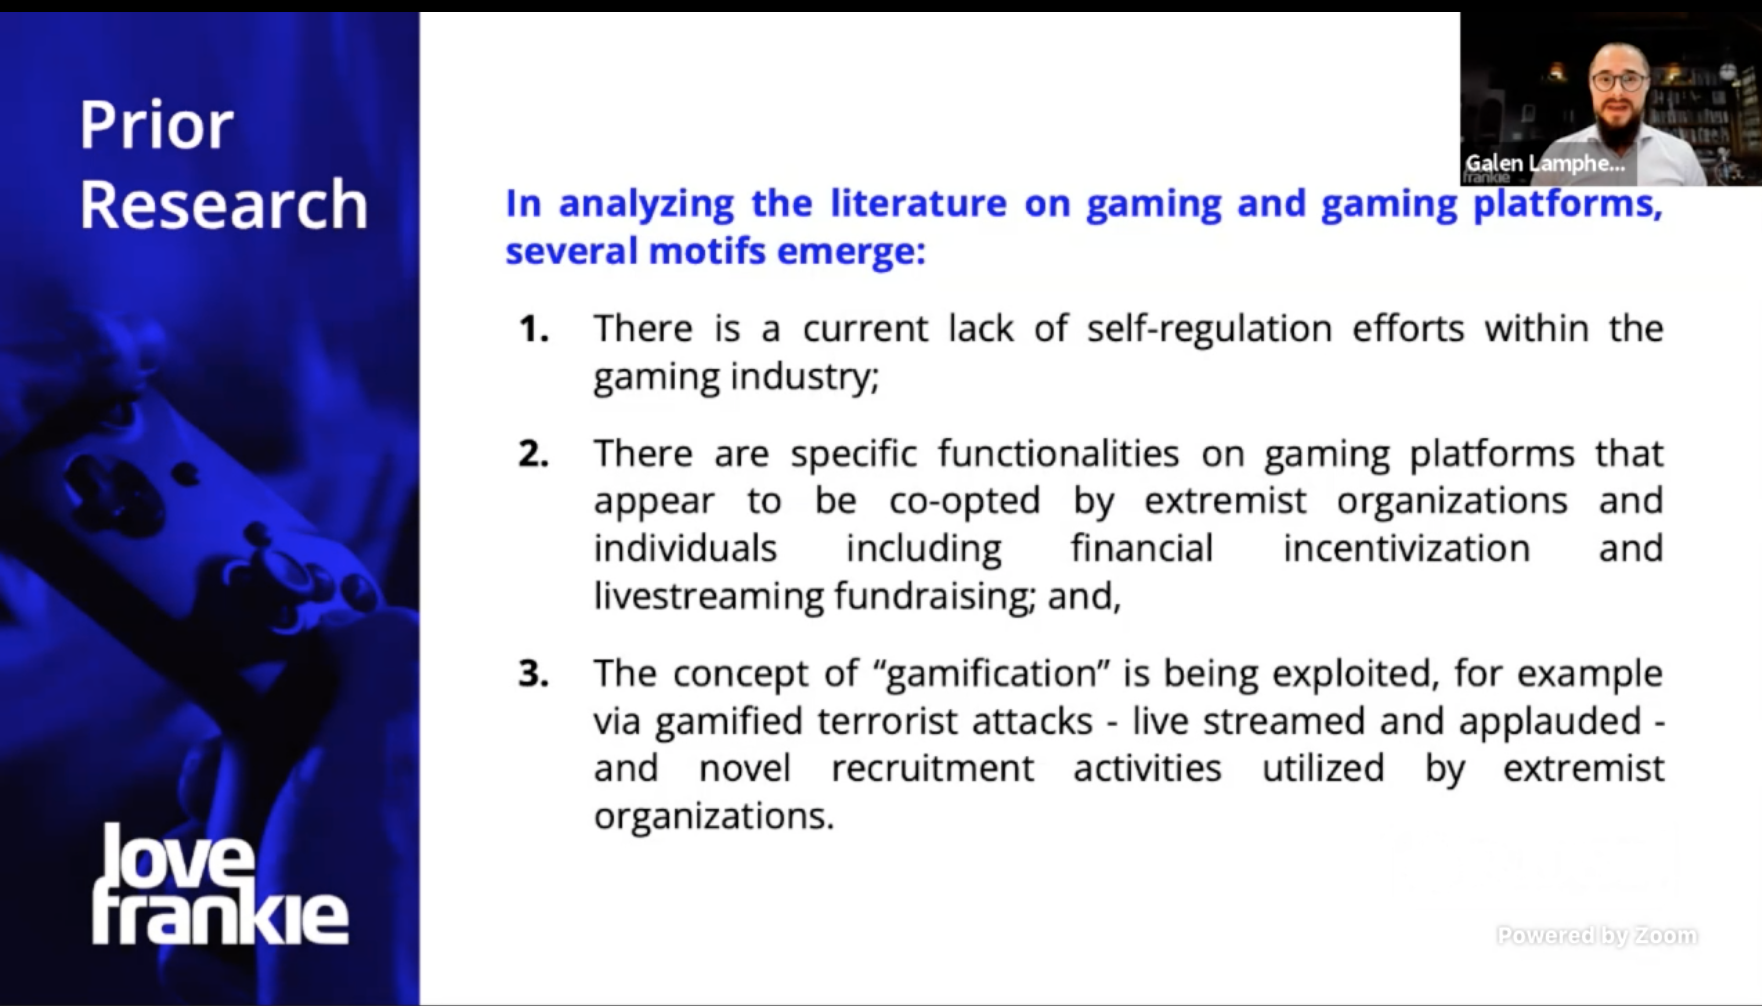 Extremism and Gaming Research Network Image